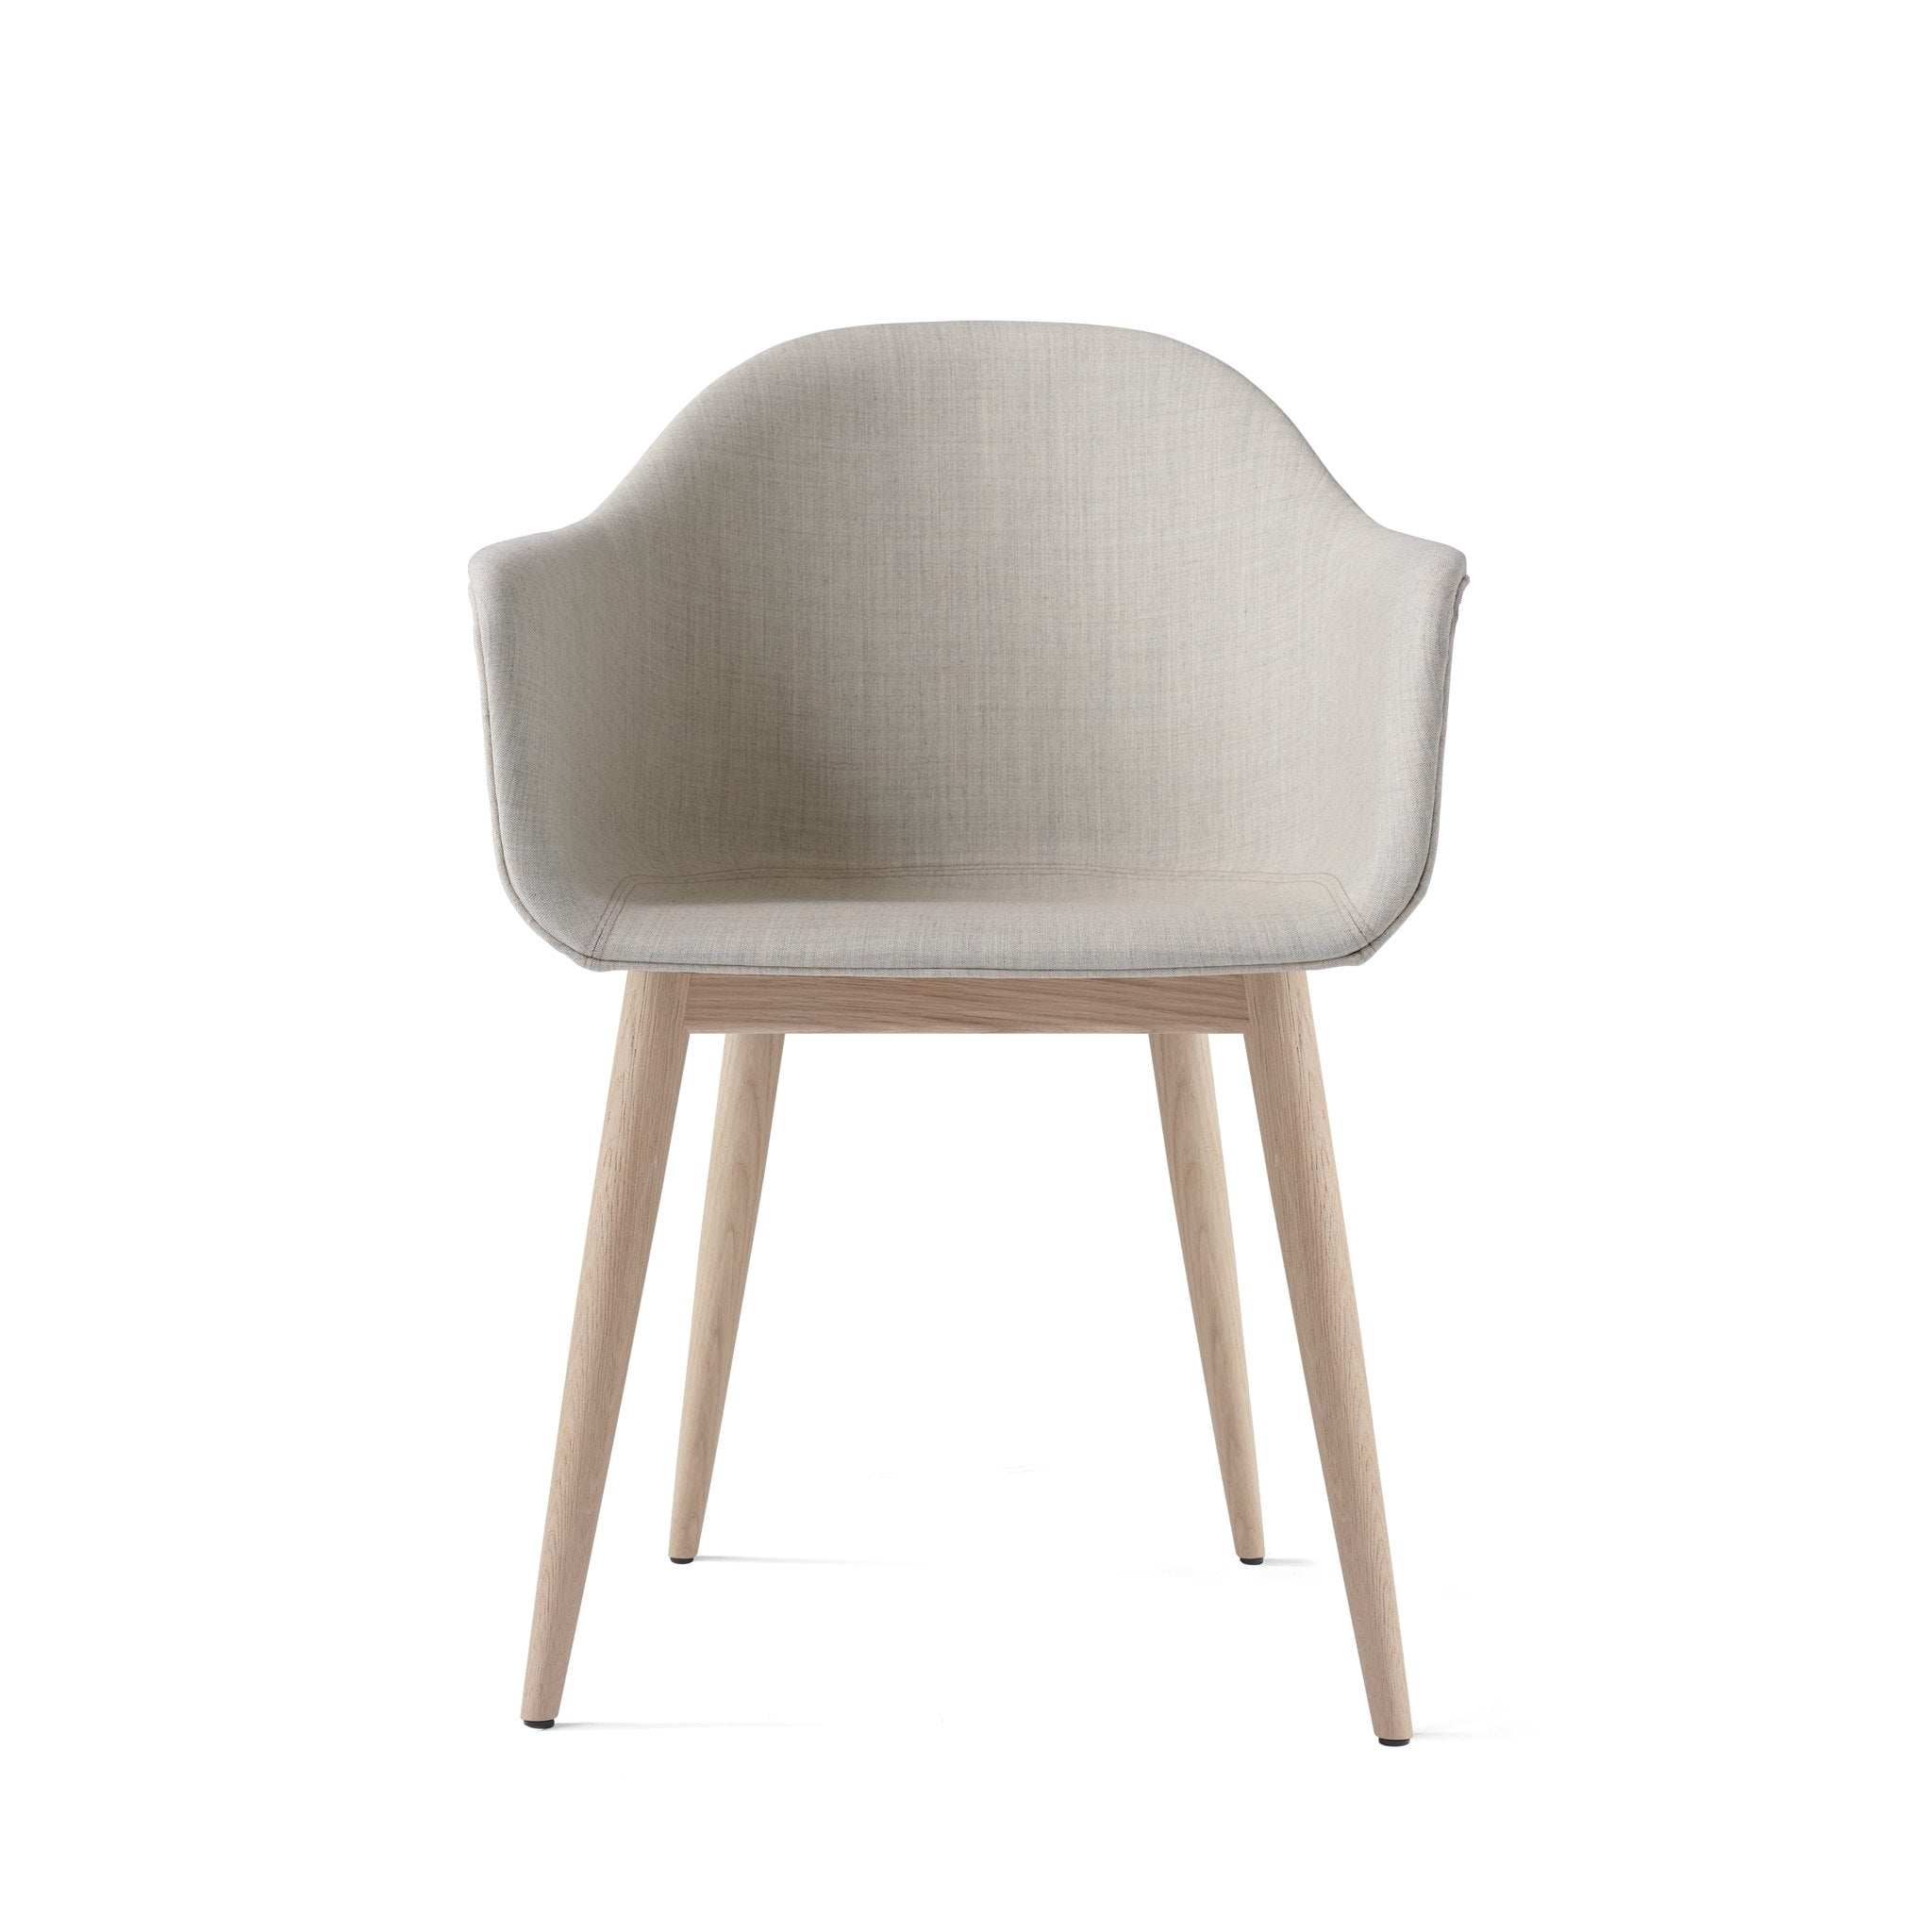 Harbour Chair Upholstered with Wood Base by Norm Architects